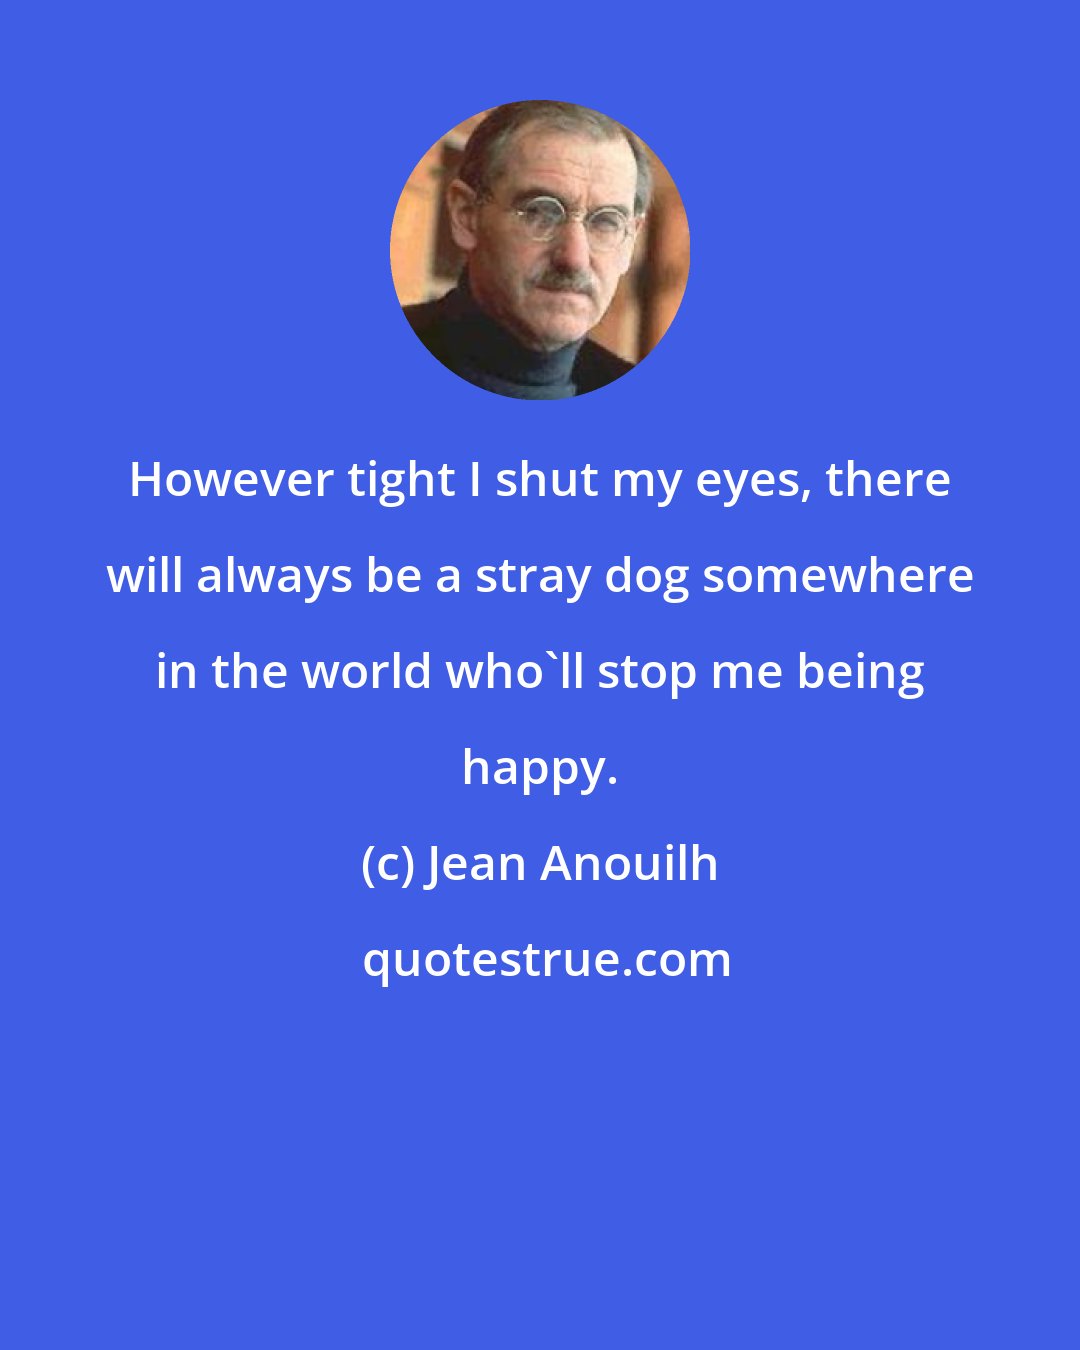 Jean Anouilh: However tight I shut my eyes, there will always be a stray dog somewhere in the world who'll stop me being happy.